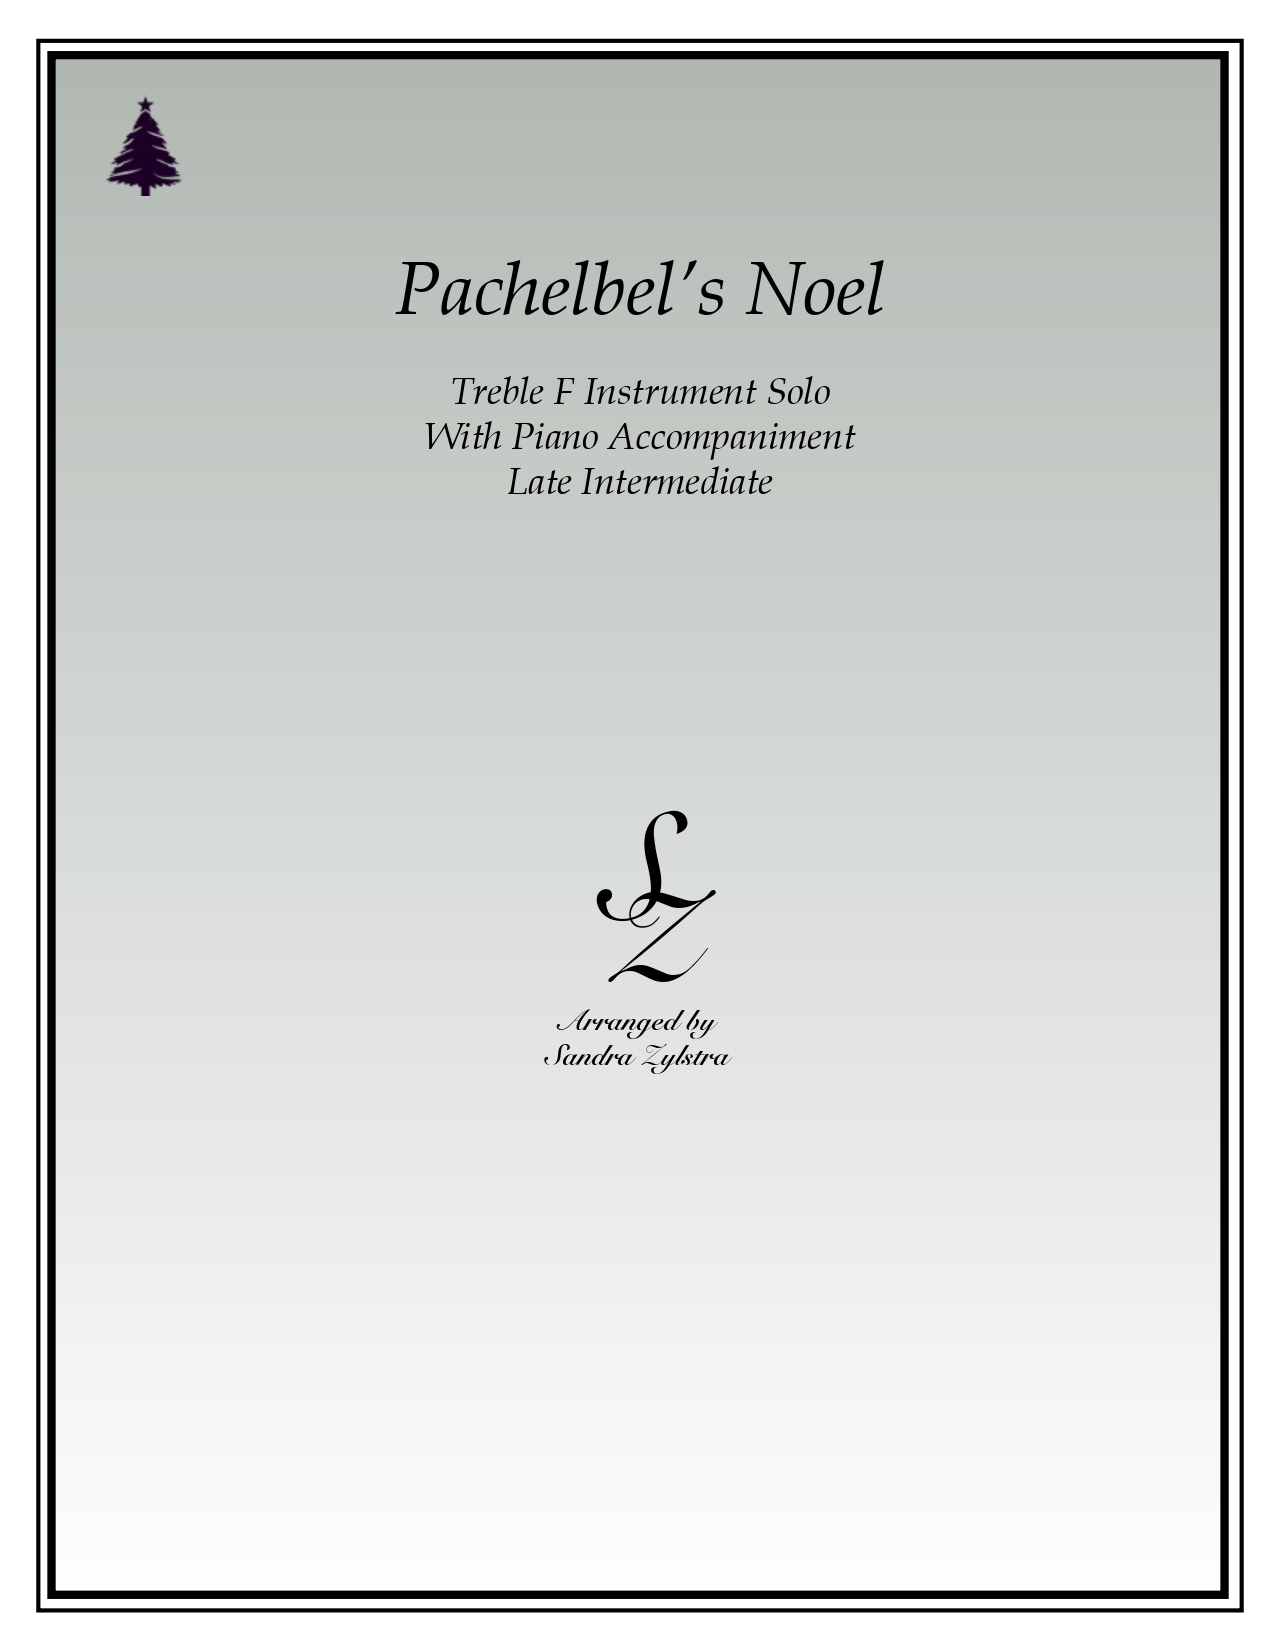 Pachelbels Noel F instrument solo part cover page 00011